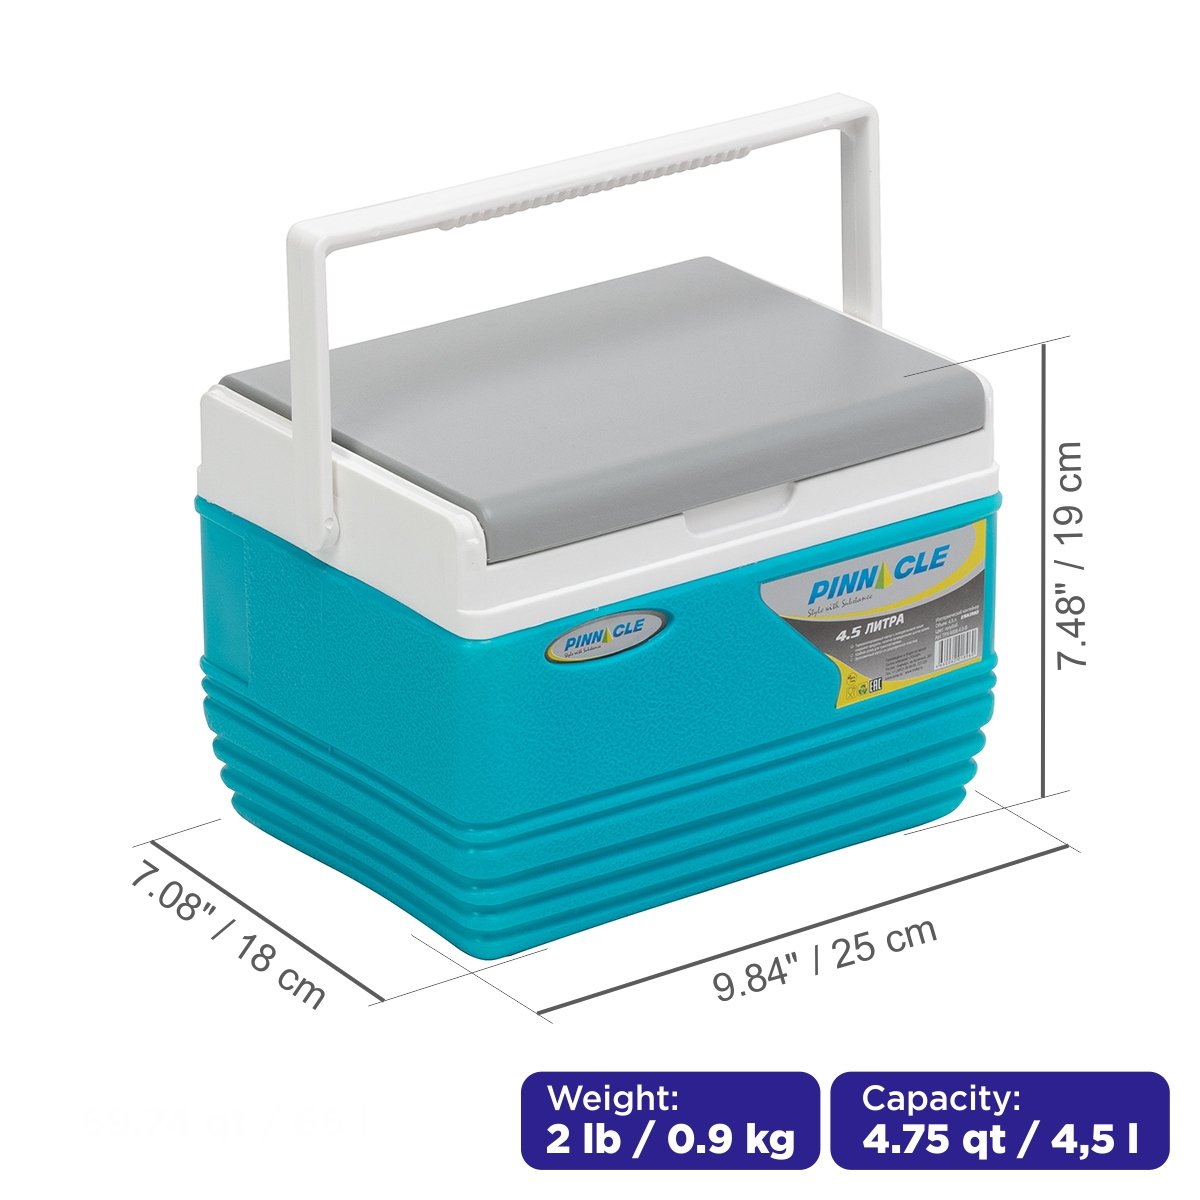 Eskimo Portable Hard-Sided Ice Chest for Camping, 4 qt, Blue is 10 inches long, 7 inches wide and 7.5 inches high, weighing 2 lbs